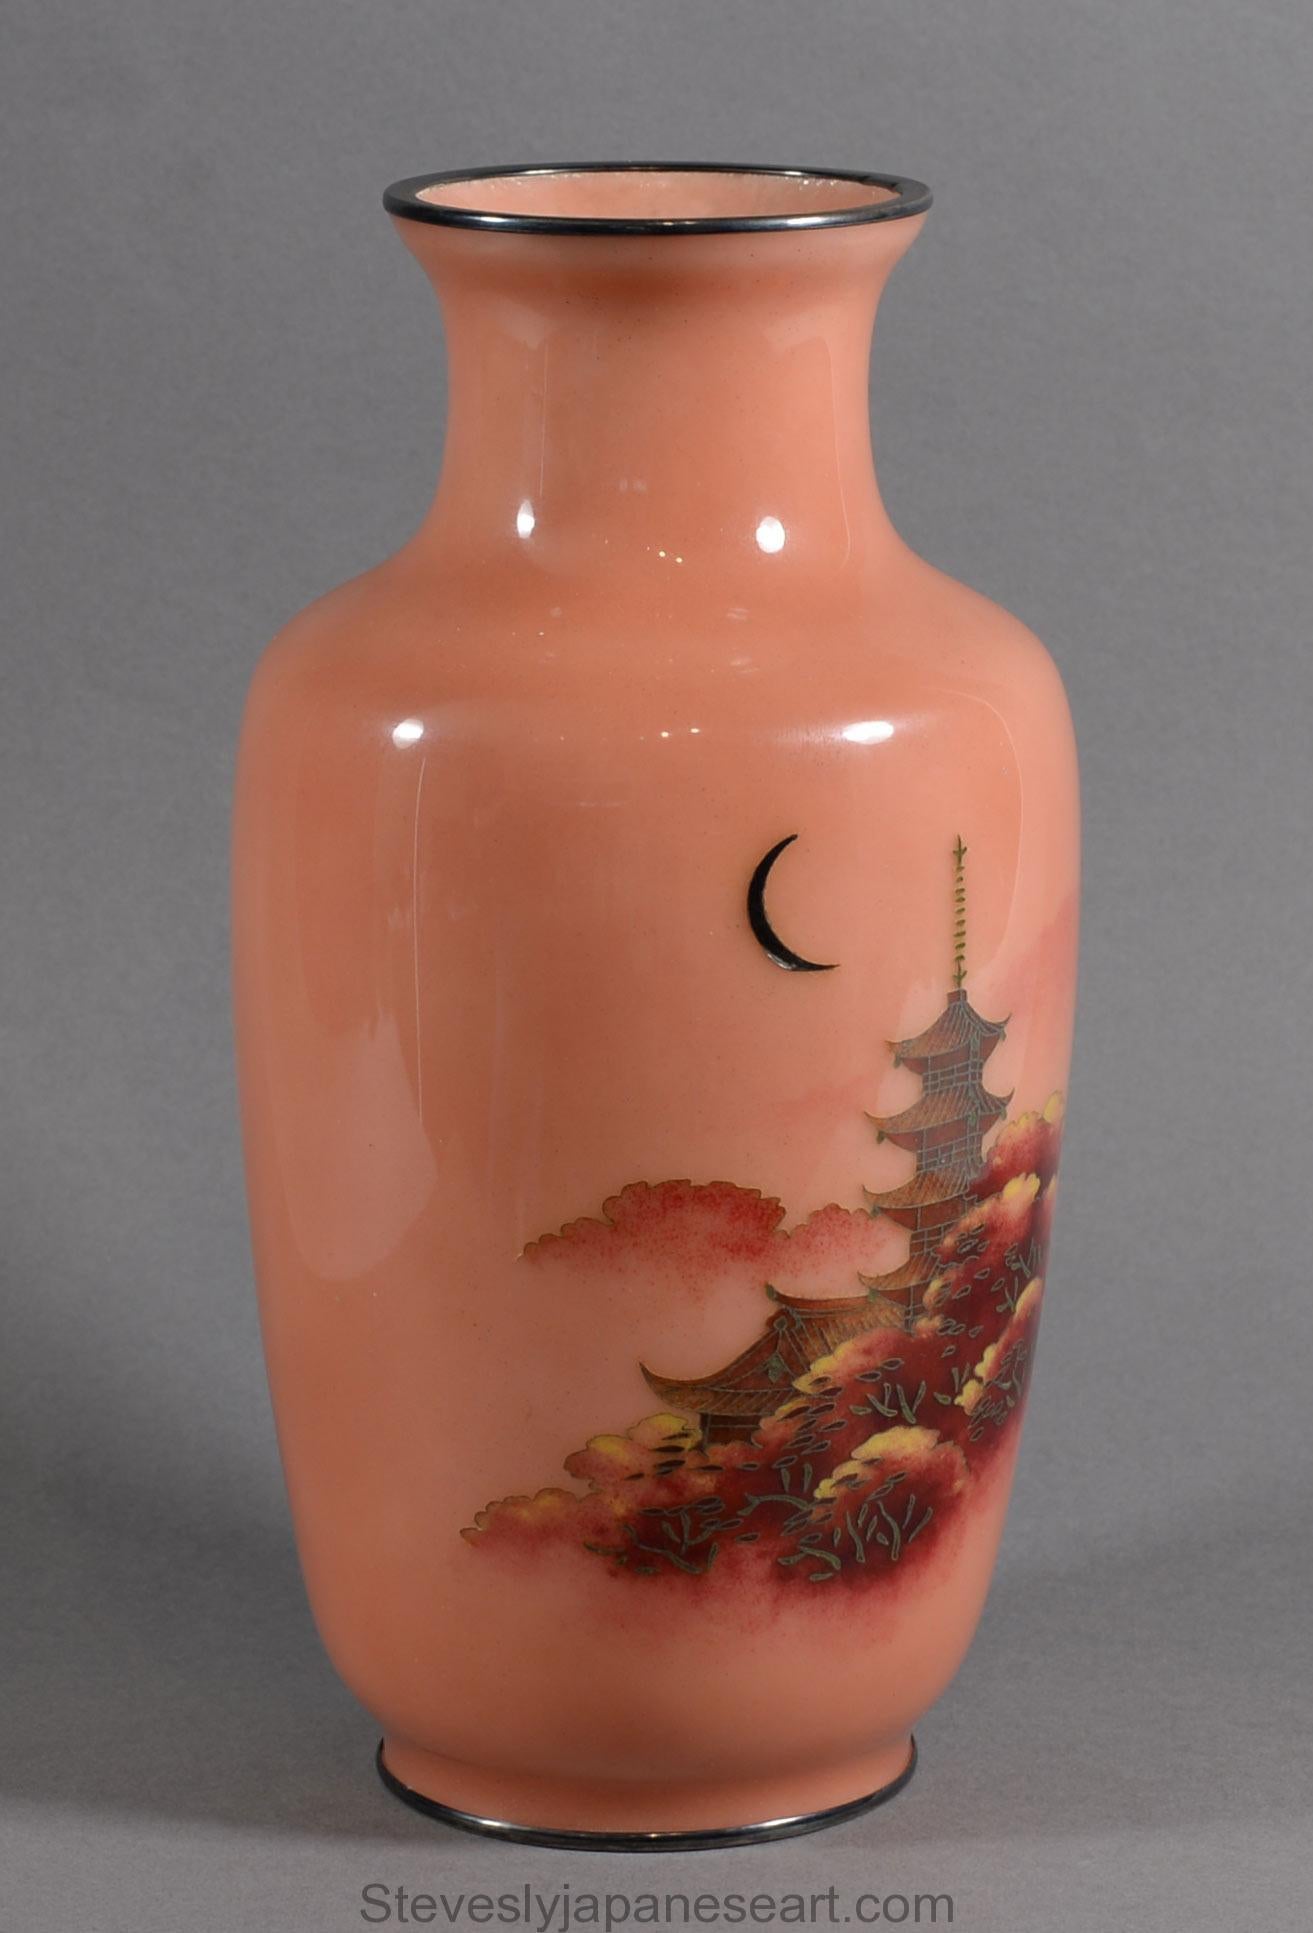 As part of our Japanese works of art collection we are delighted to offer this charming early 20th c Taisho/Showa period Cloisonné enamel vase by the highly regarded Ando Jubei company , the striking Peach ground Musen enamel body is finely detailed